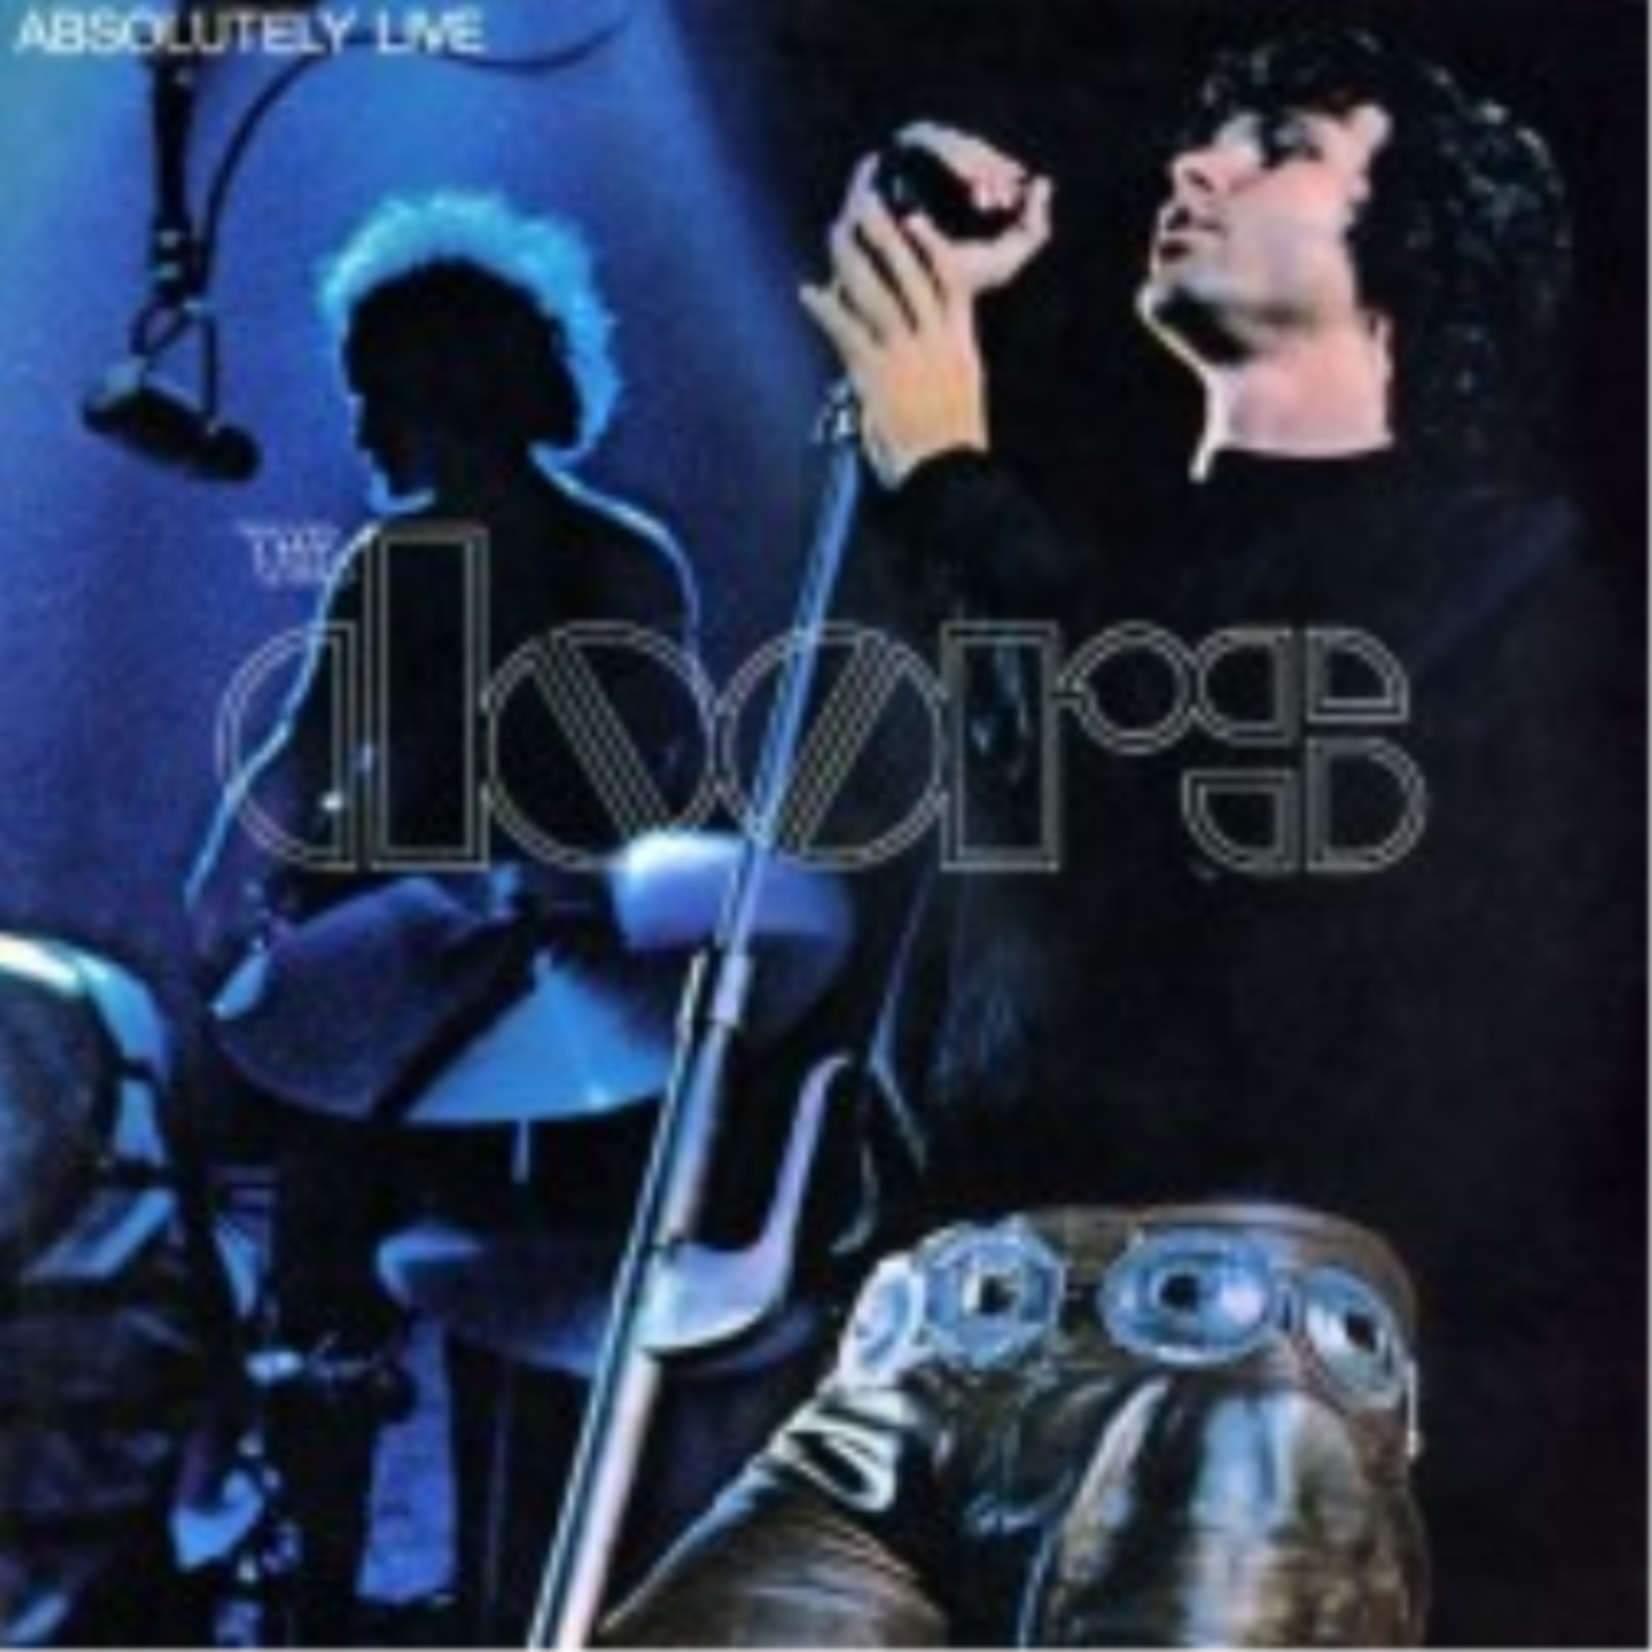 THE DOORS ABSOLUTELY LIVE (LIMITED EDITION) (MIDNIGHT BLUE VINYL)